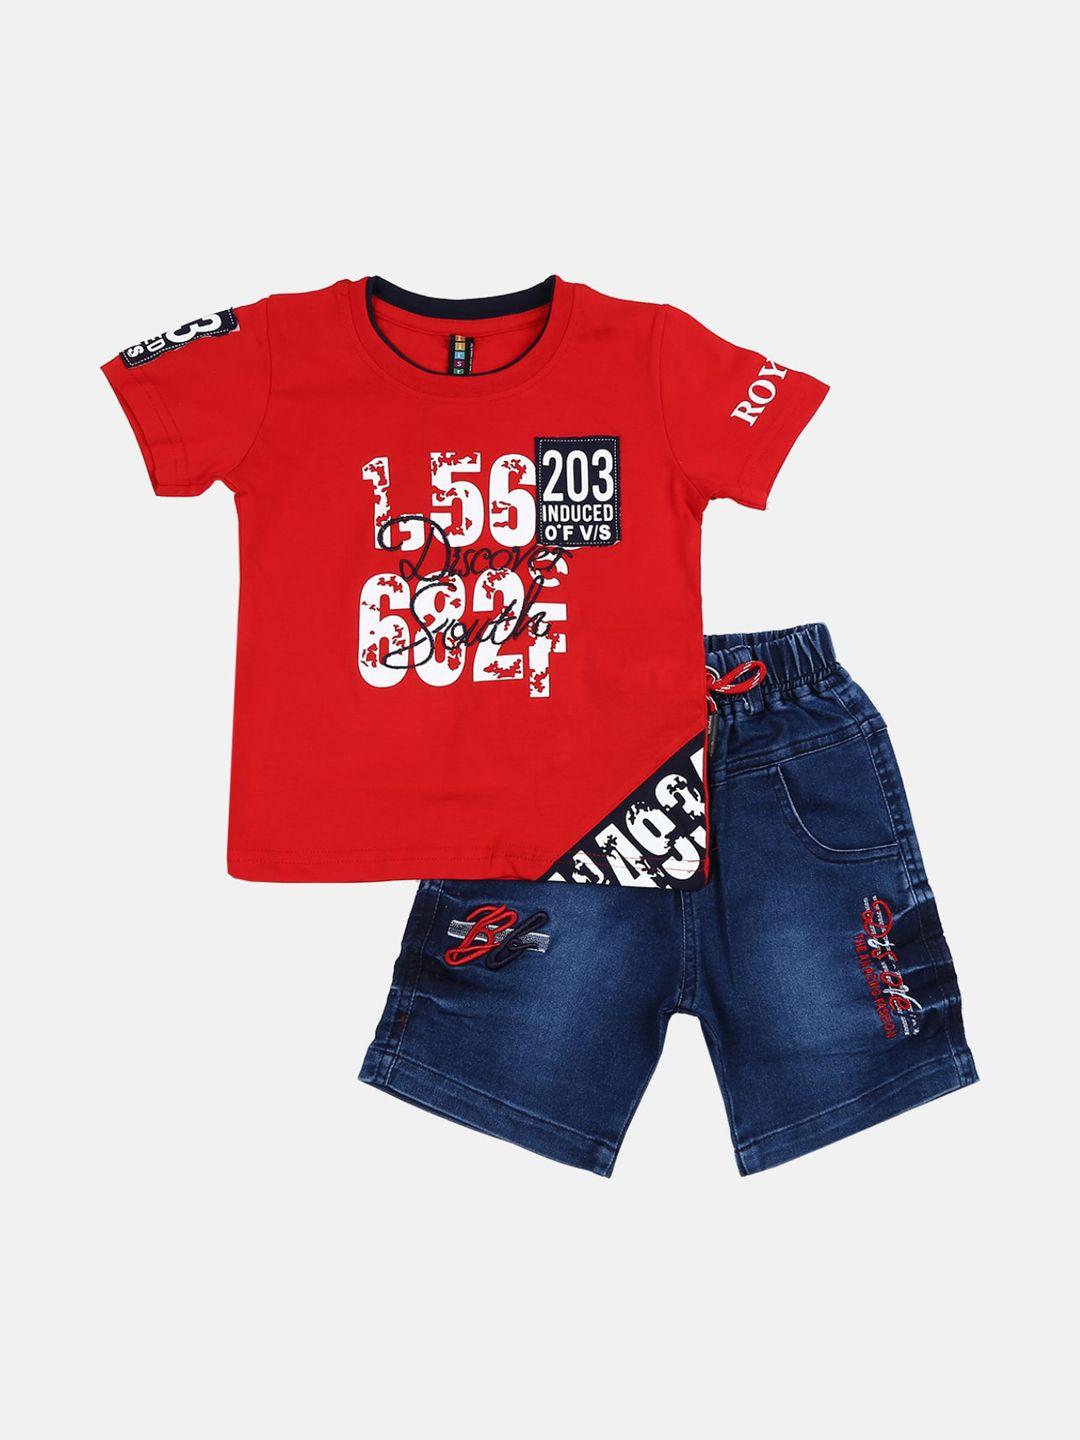 v-mart unisex kids red & blue printed t-shirt with shorts